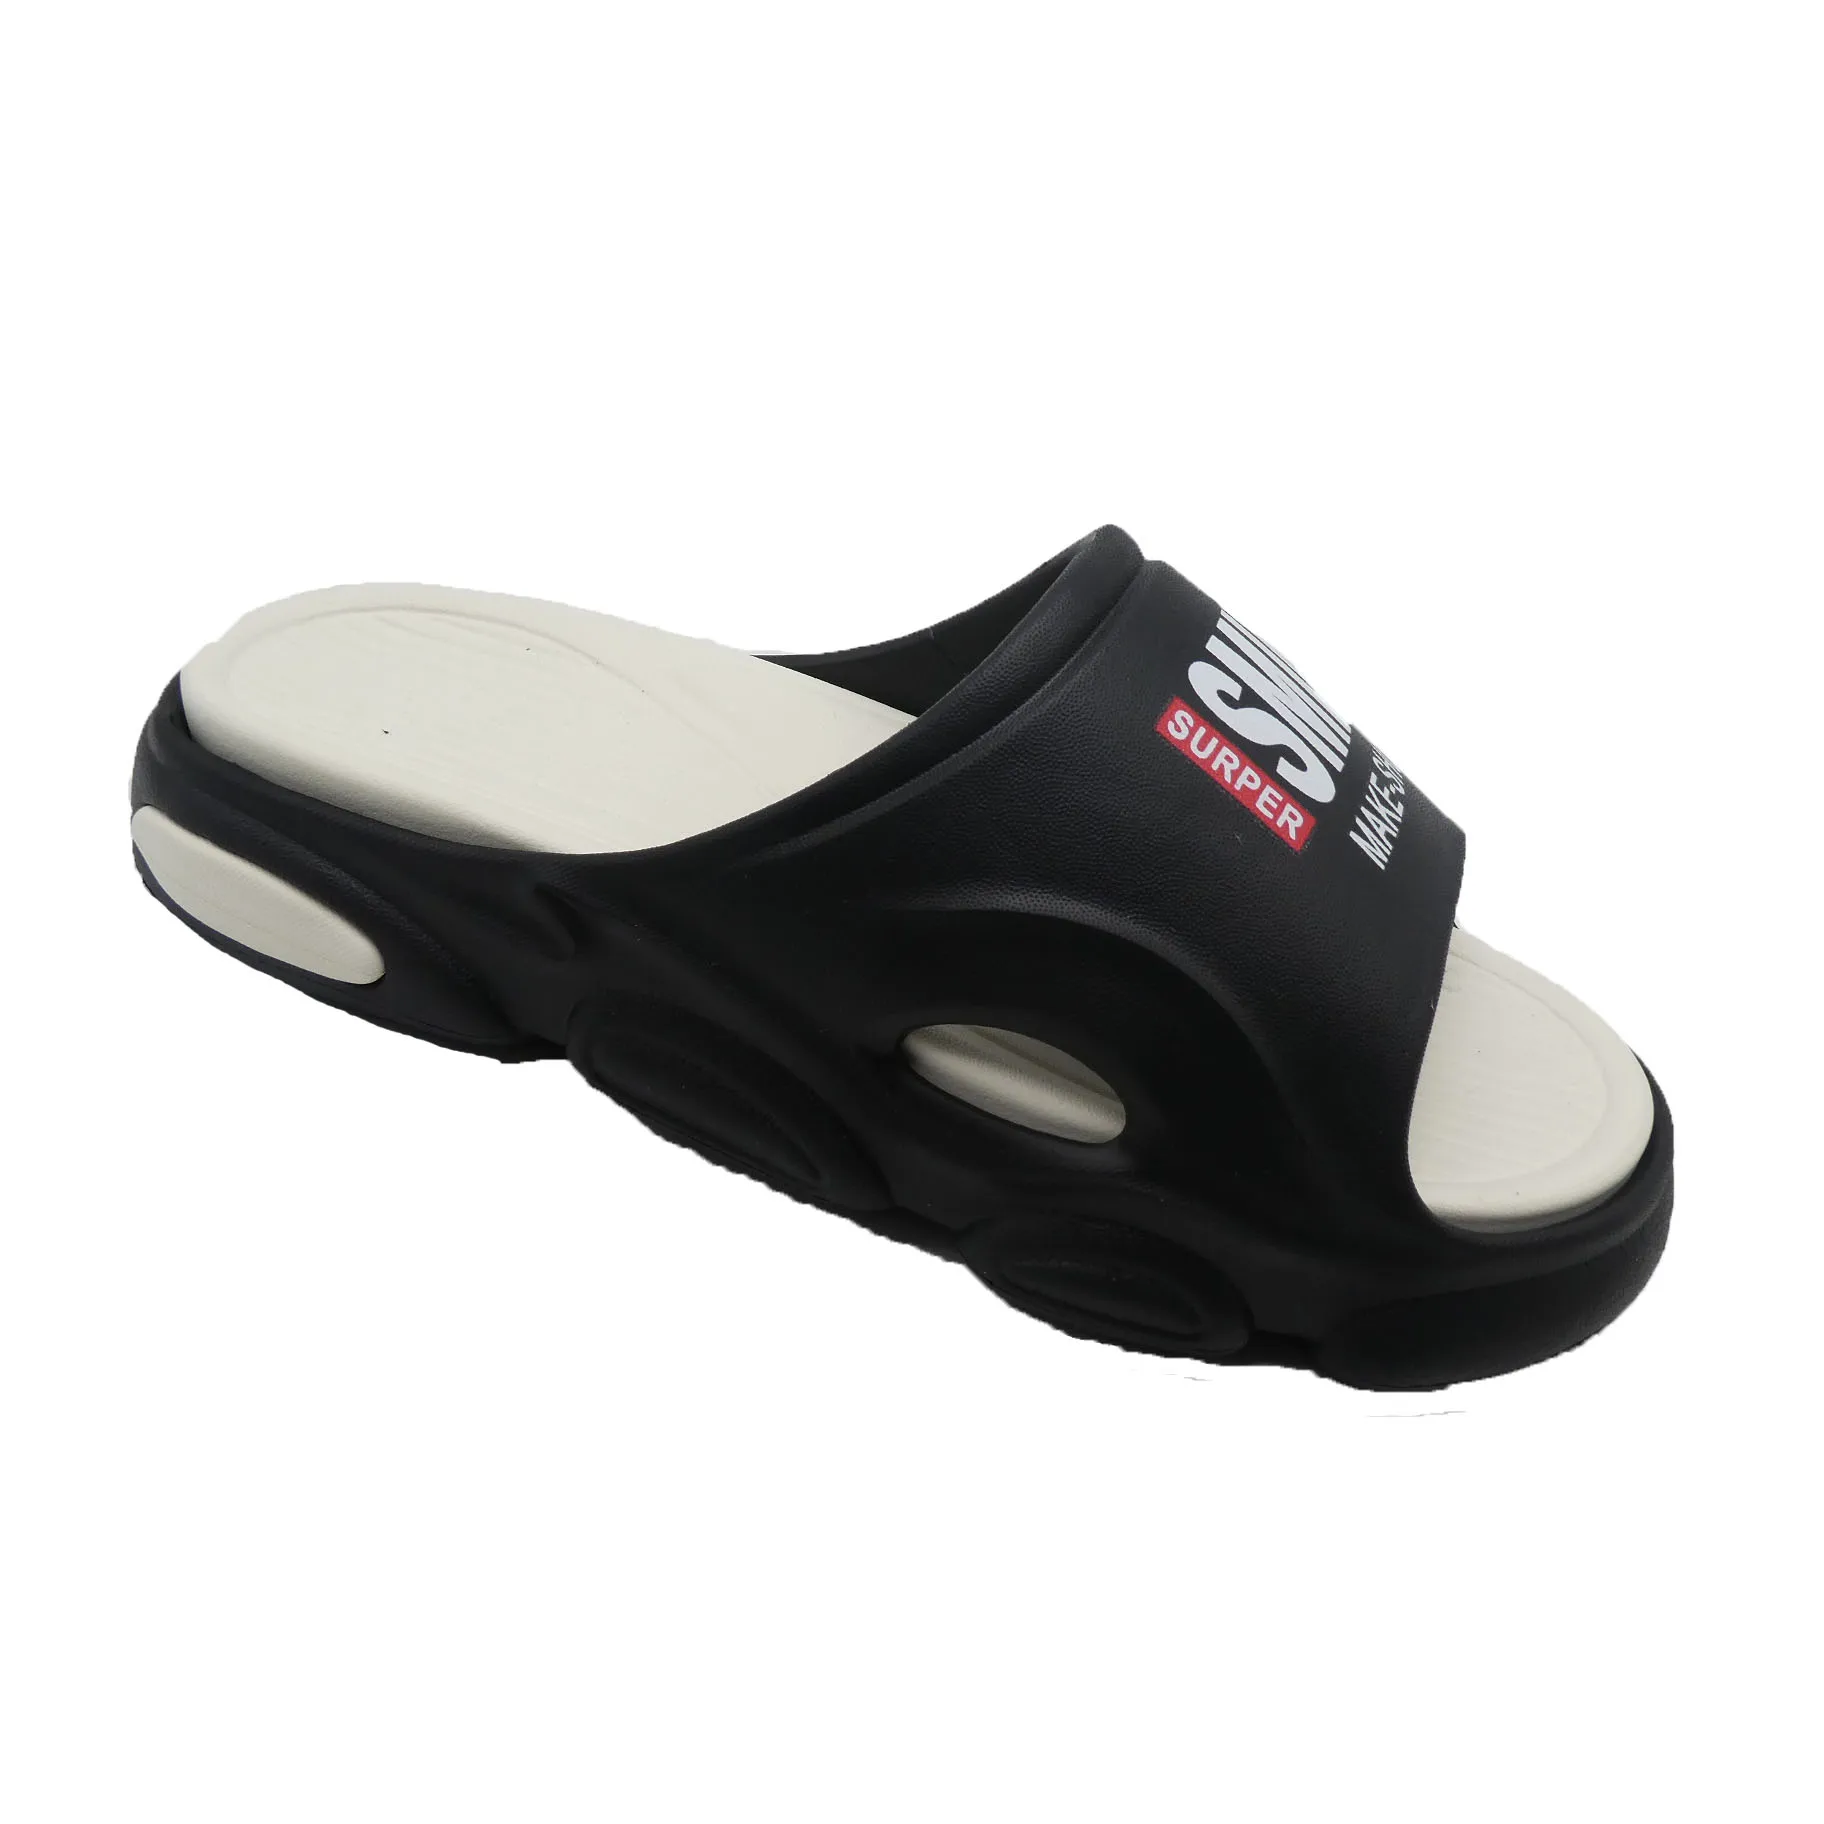 High Quality Comfortable Anti-Slip Thick Sole EVA outdoor indoor slippers Sandal Slides Slippers